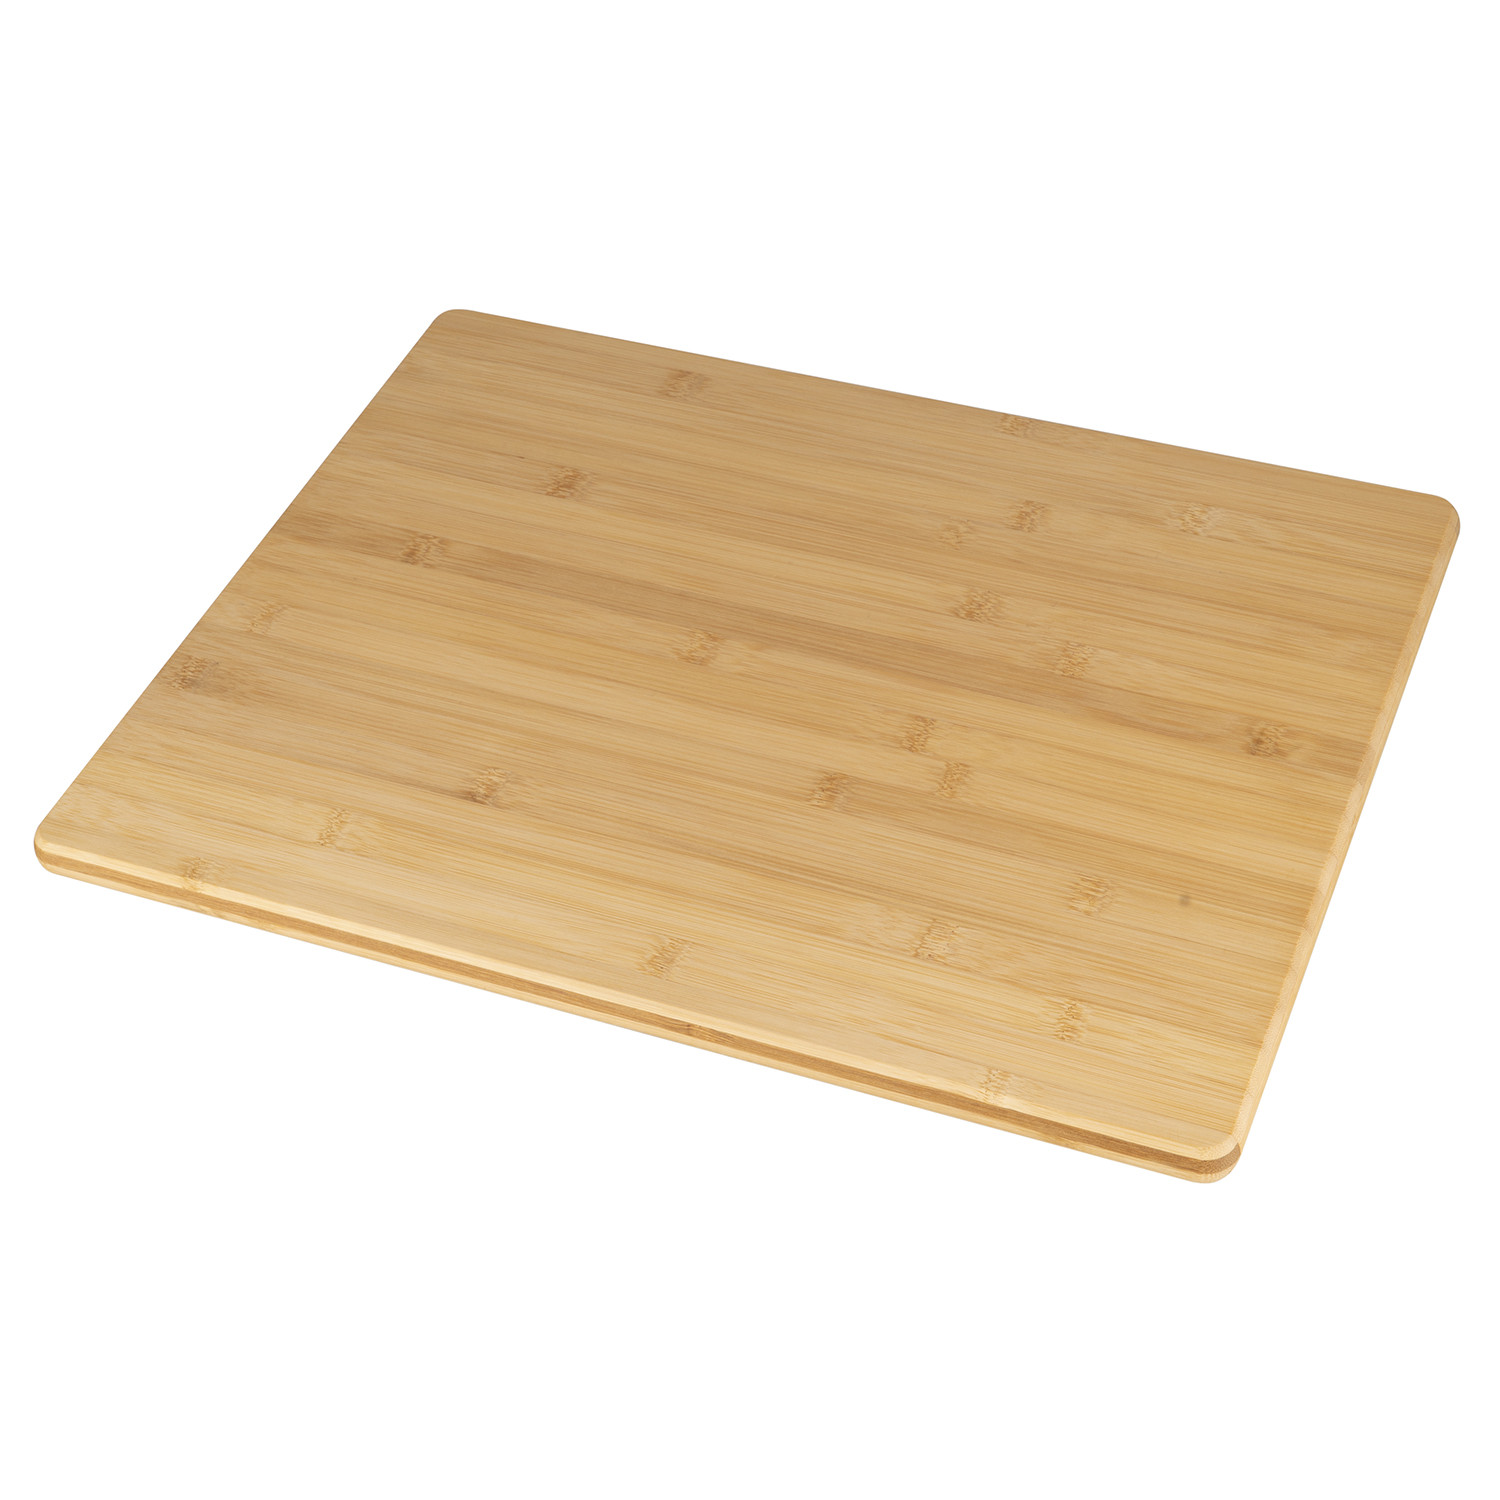 Bamboo Pastry Board Image 2